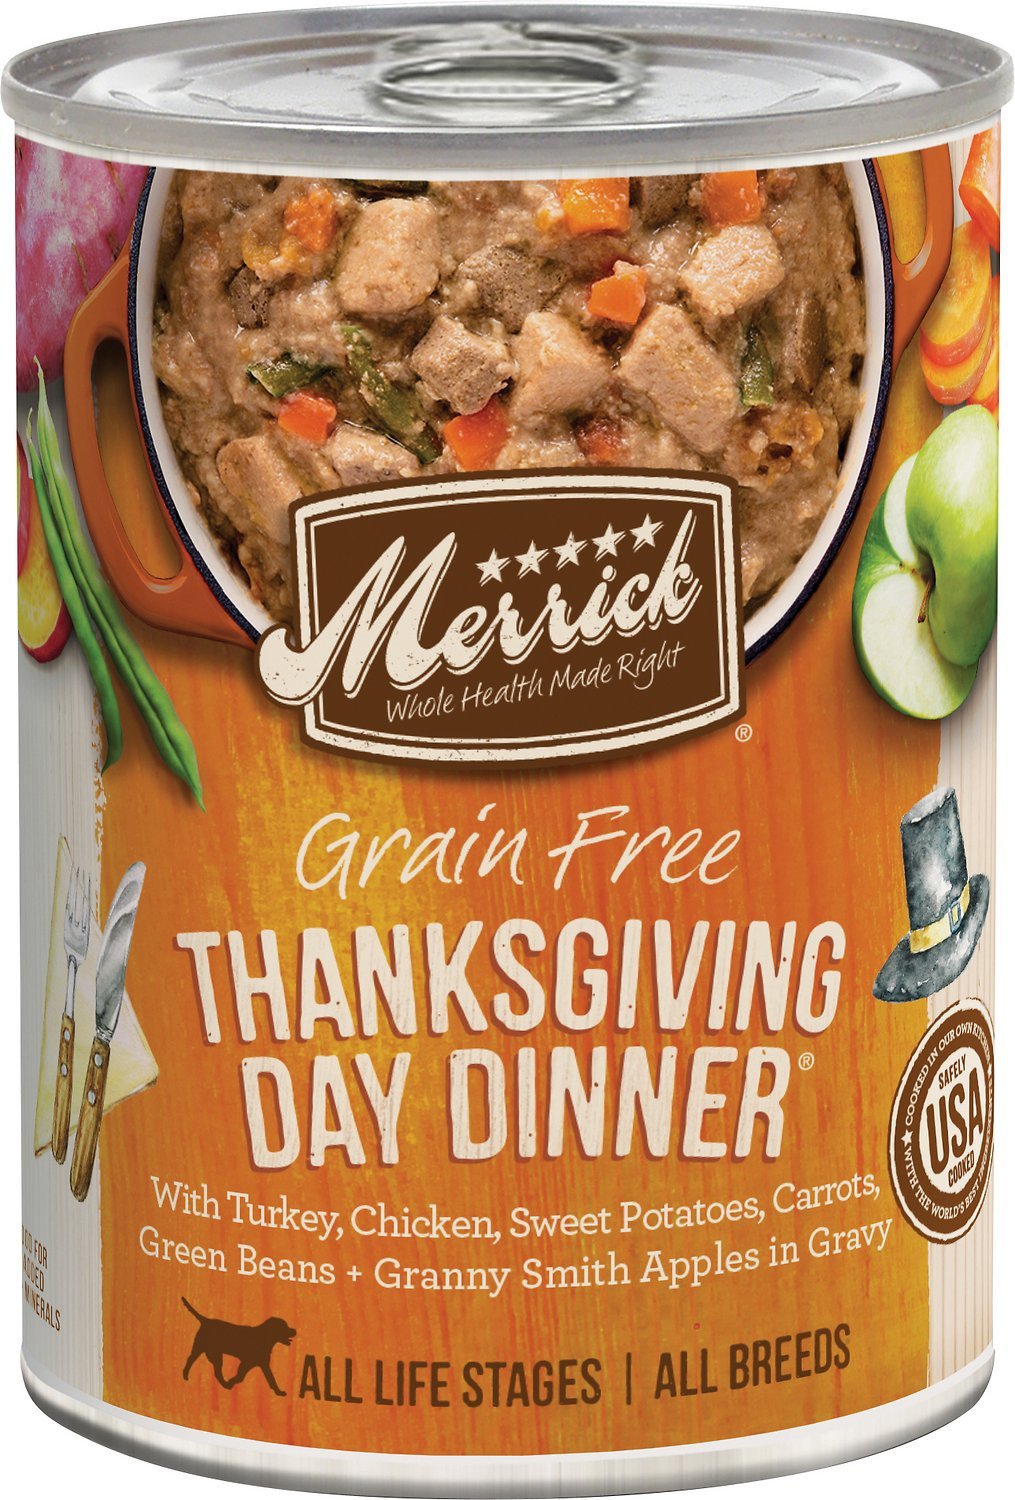 Craig'S Thanksgiving Dinner In A Can
 Merrick Grain Free Thanksgiving Day Dinner Canned Dog Food